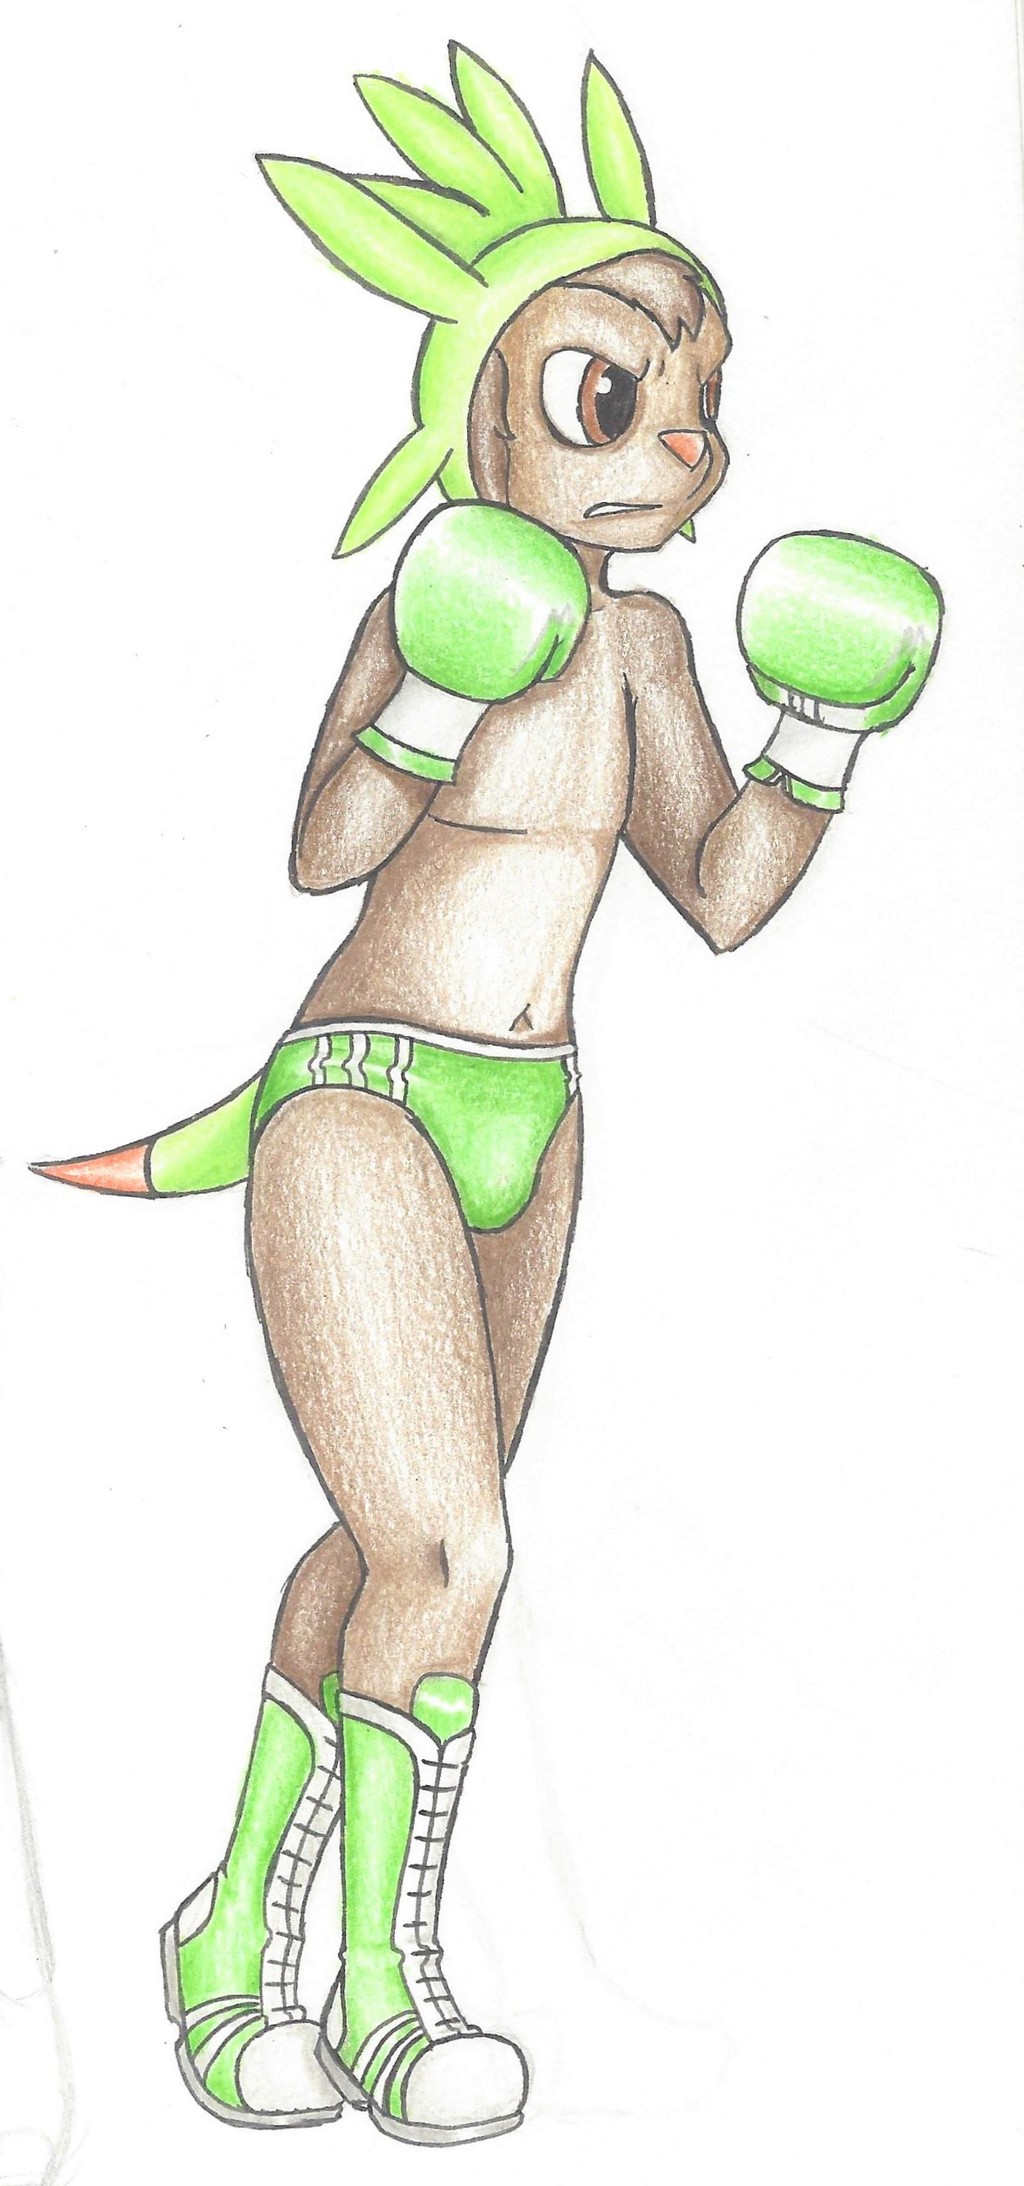 The Little Chespin Fighter